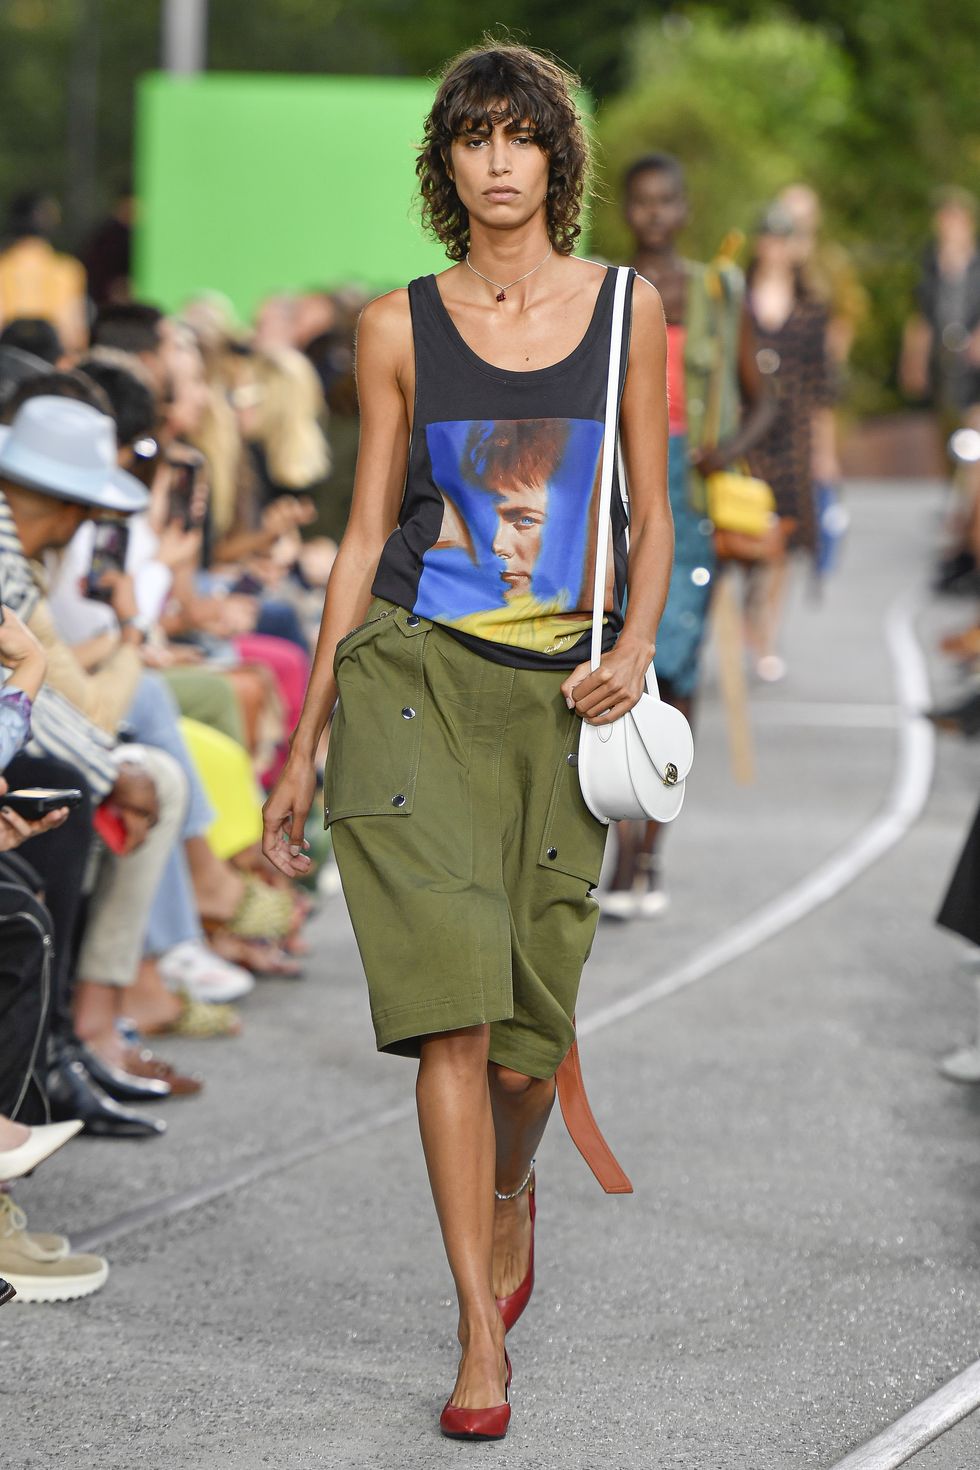 32 of the Best Looks from New York Fashion Week Spring 2020